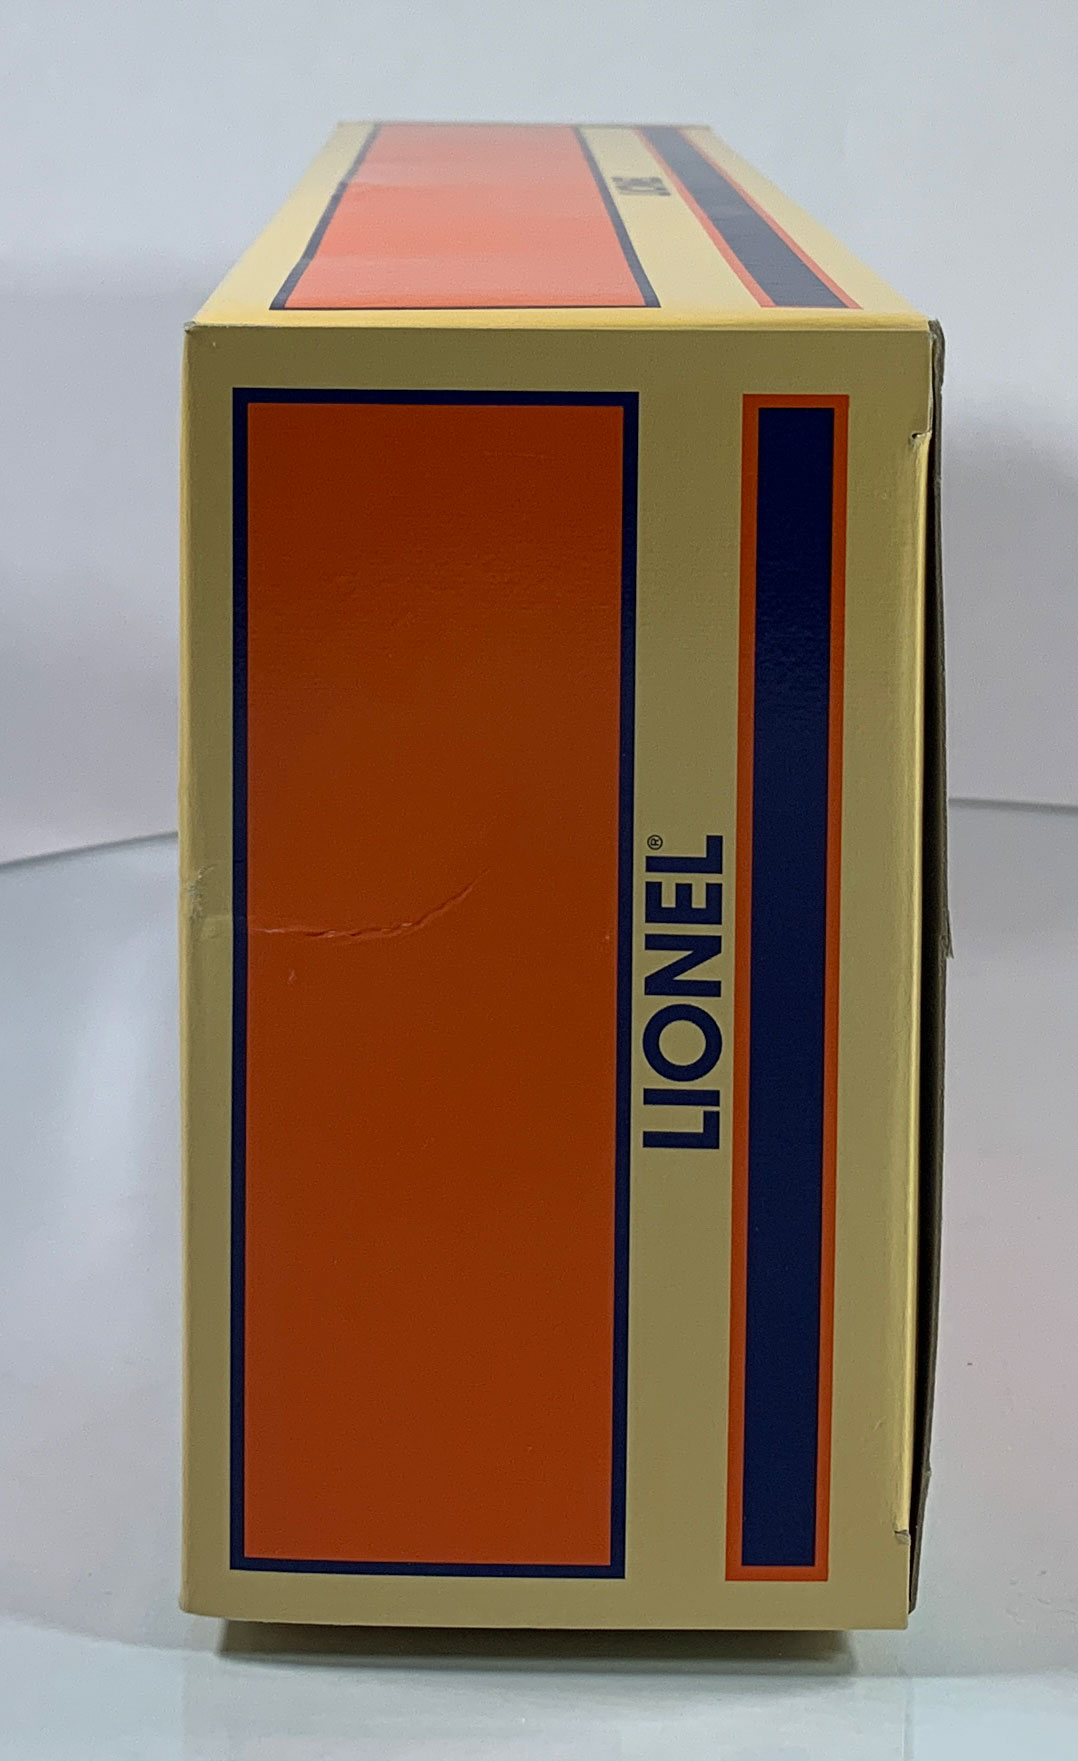 LIONEL • O GAUGE • 2000 Hellgate Boxcar #2 6-39200 • NEW OLD STOCK